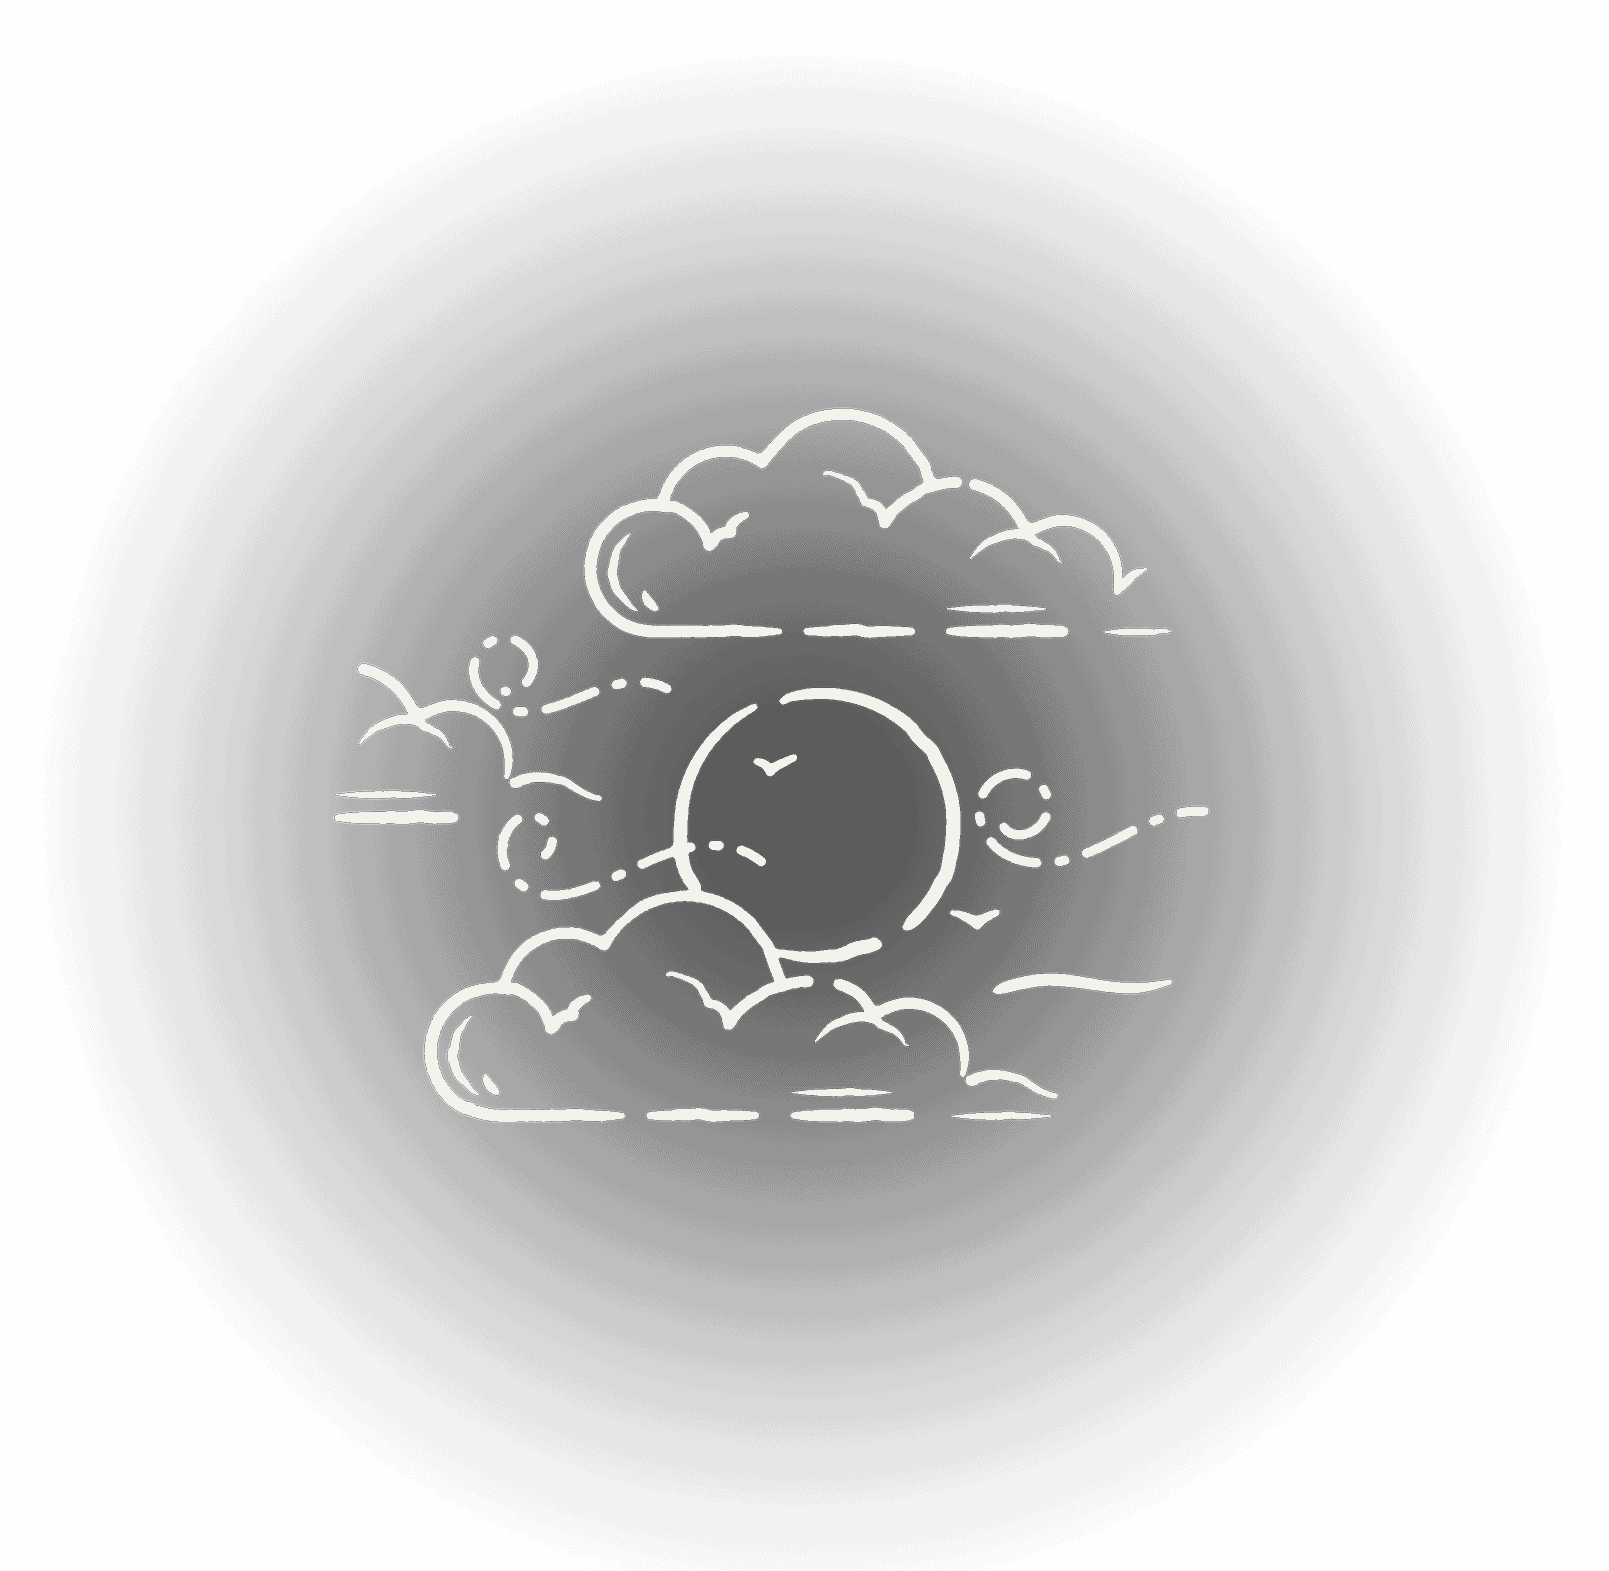 illustration of clouds in the sky